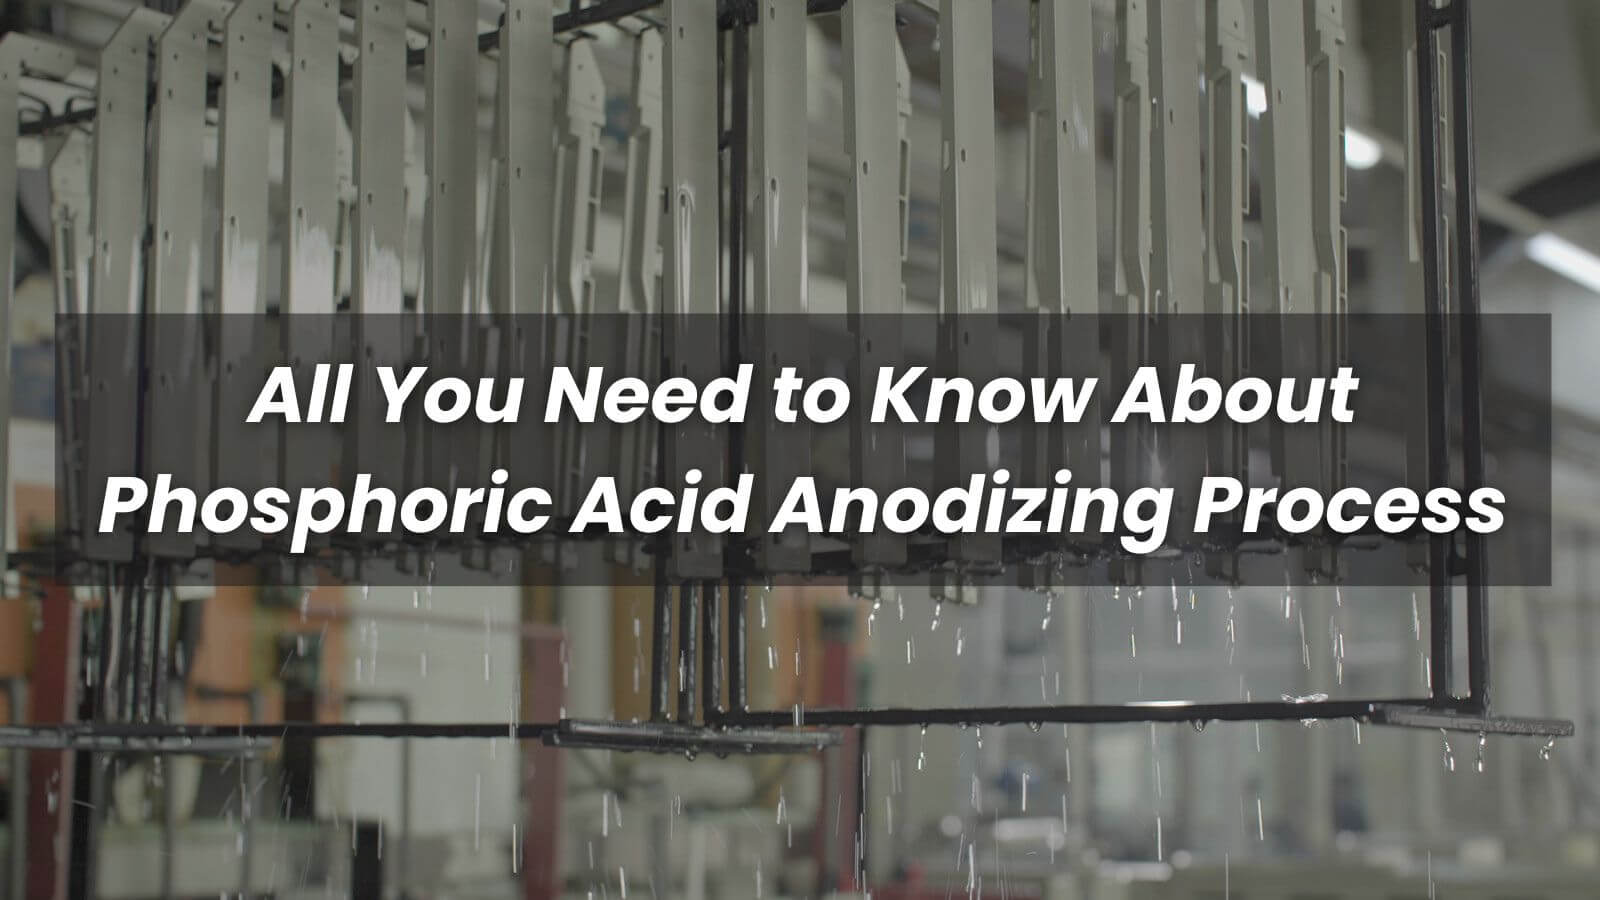 All You Need to Know About Phosphoric Acid Anodizing Process